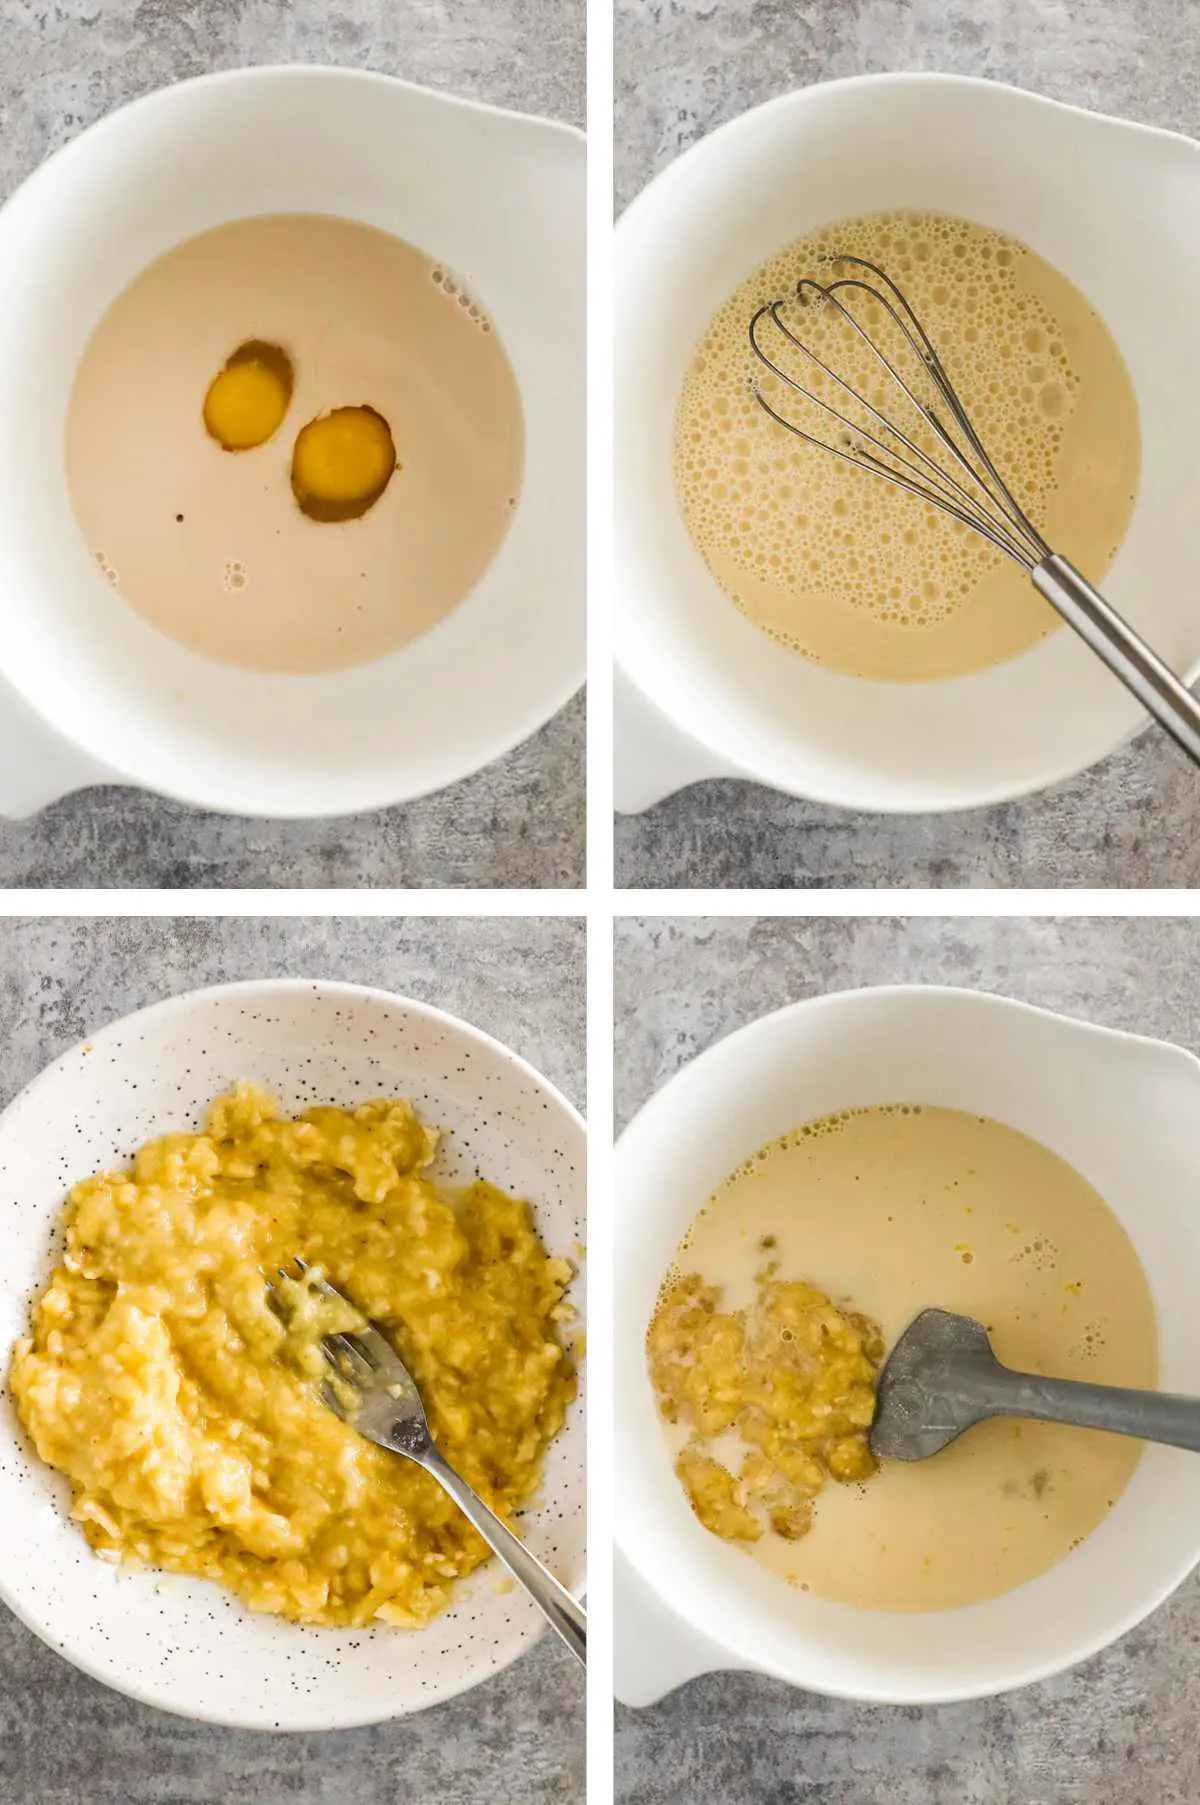 Four images in one. 1. Wet ingredients in a bowl. 2. Wet ingredients mixed with a whisk. 3. Mashed bananas on a plate. 4. Mashed bananas added to the bowl of mixed wet ingredients